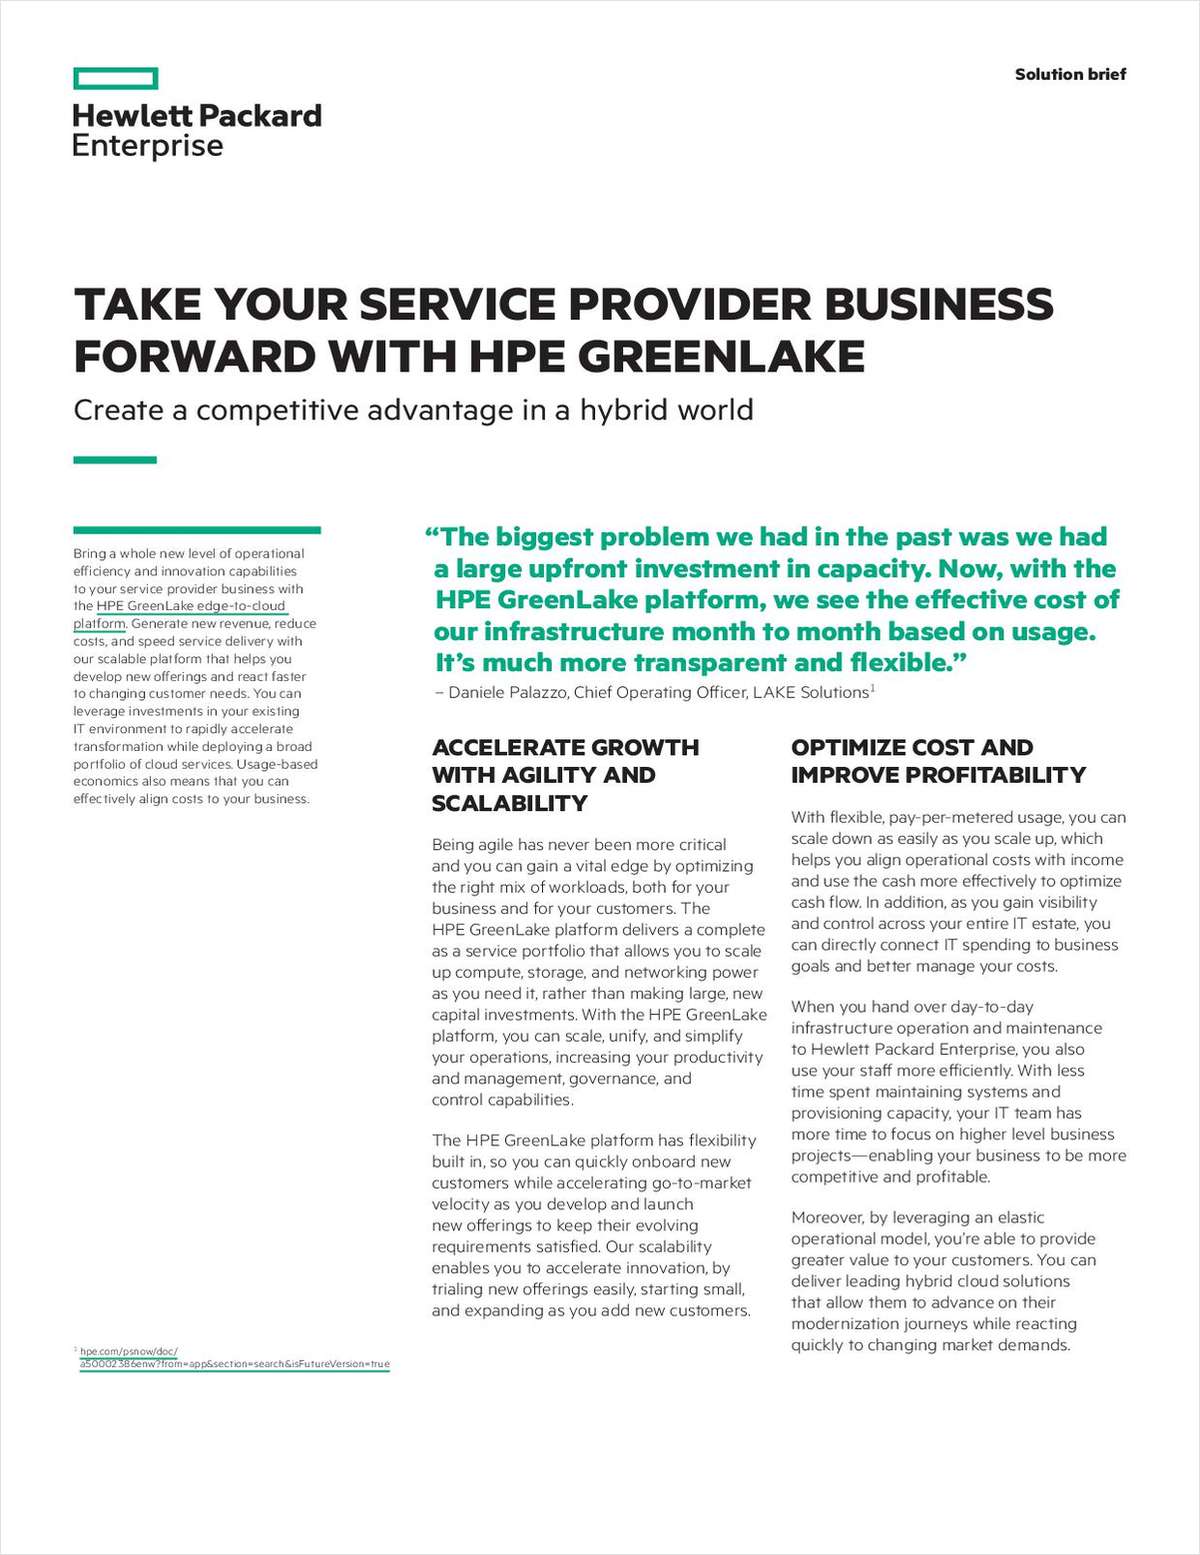 Take Your Service Provider Business Forward with HPE GreenLake